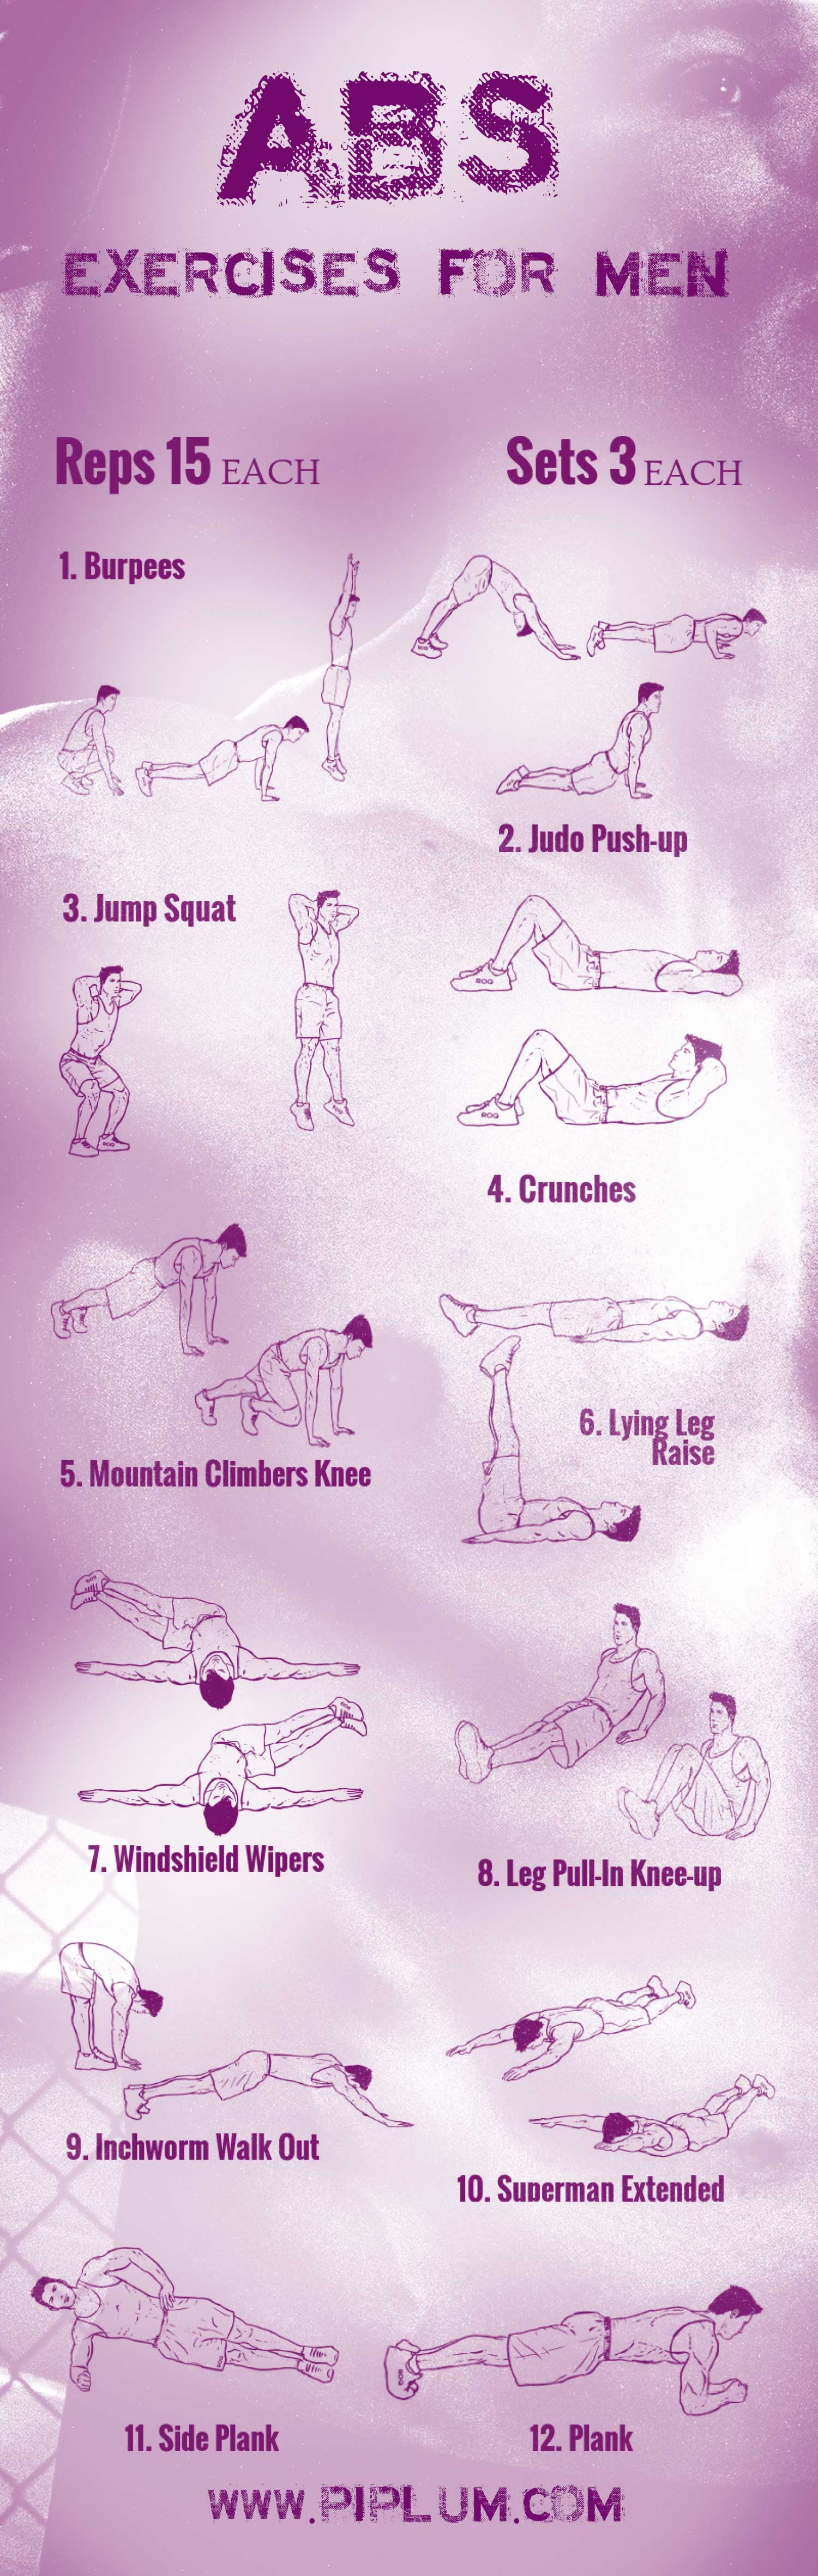 abs-exercises-for-men-poster